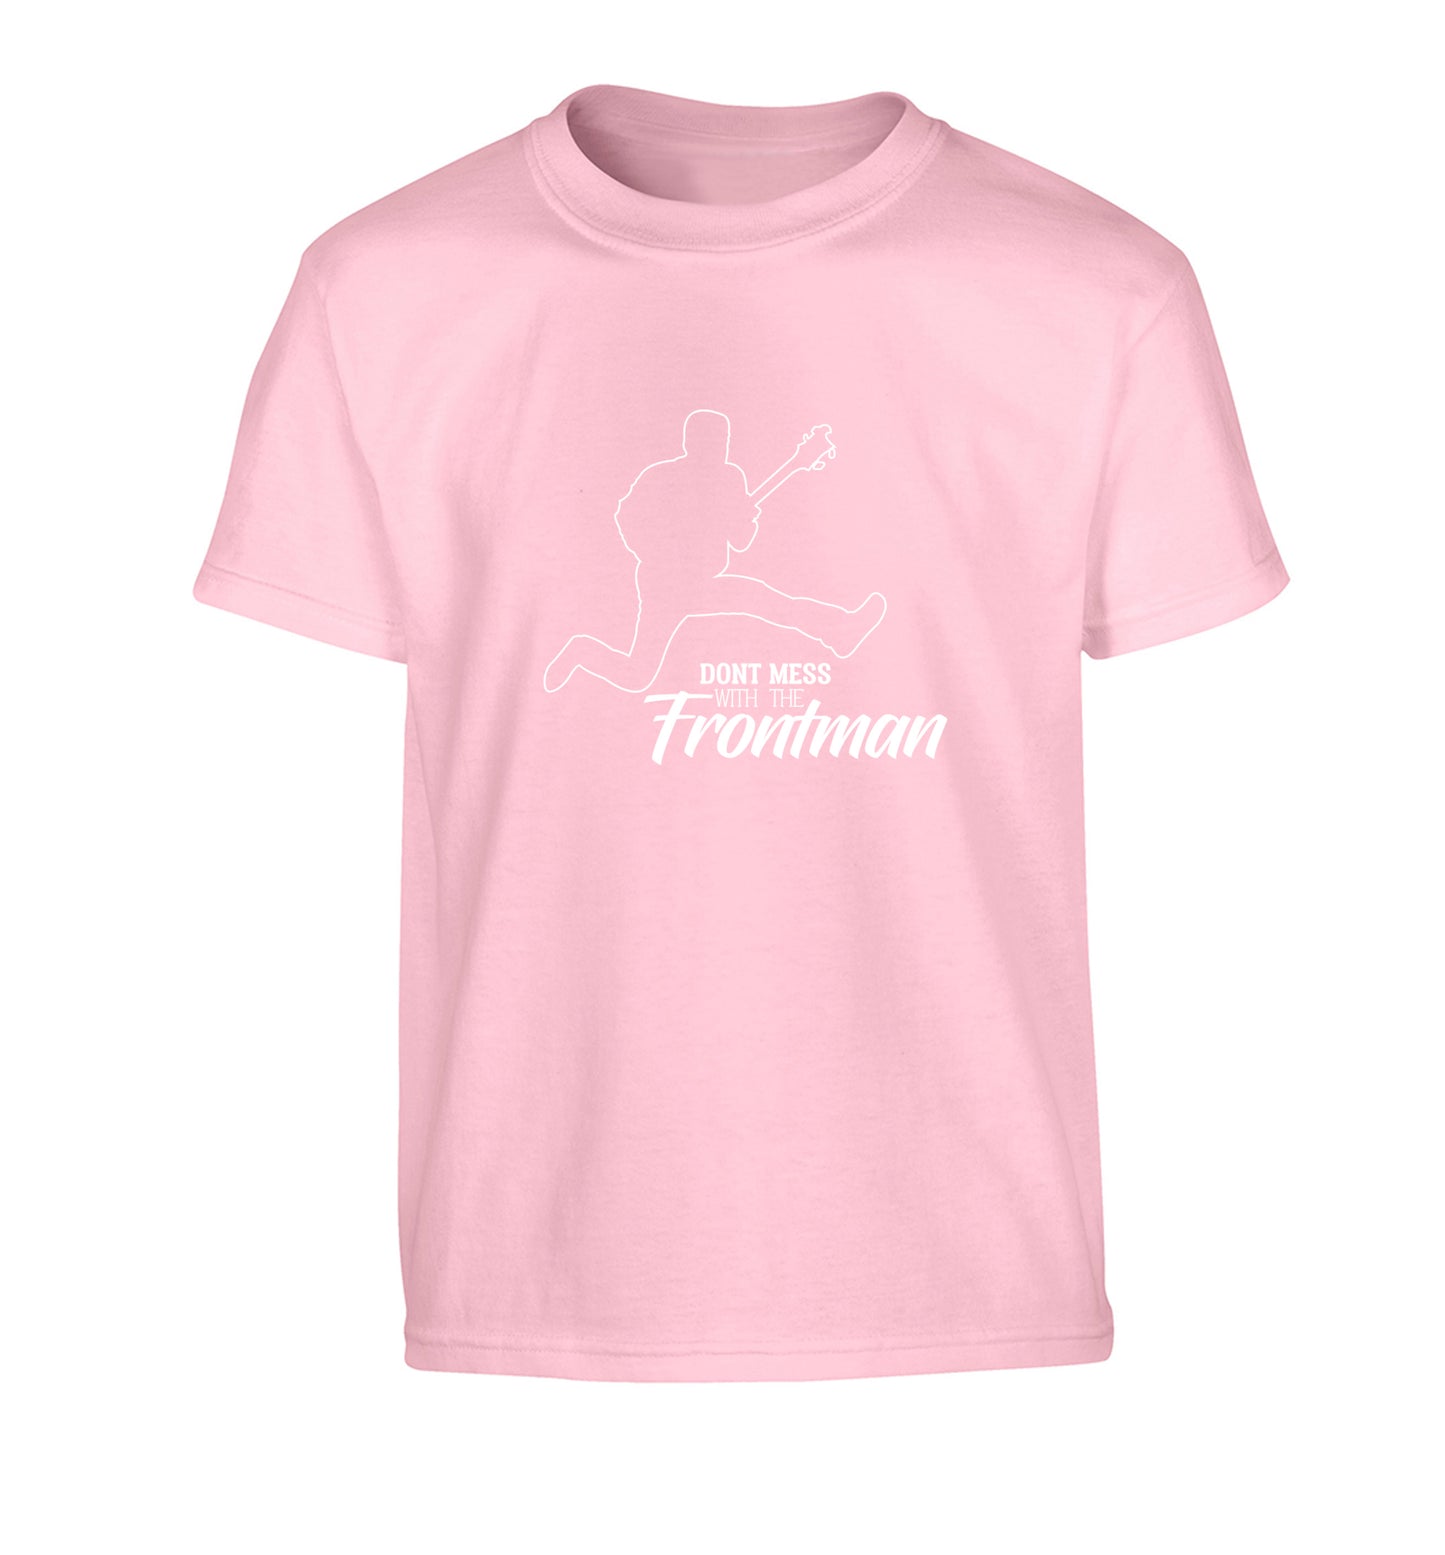 Don't mess with the frontman Children's light pink Tshirt 12-13 Years